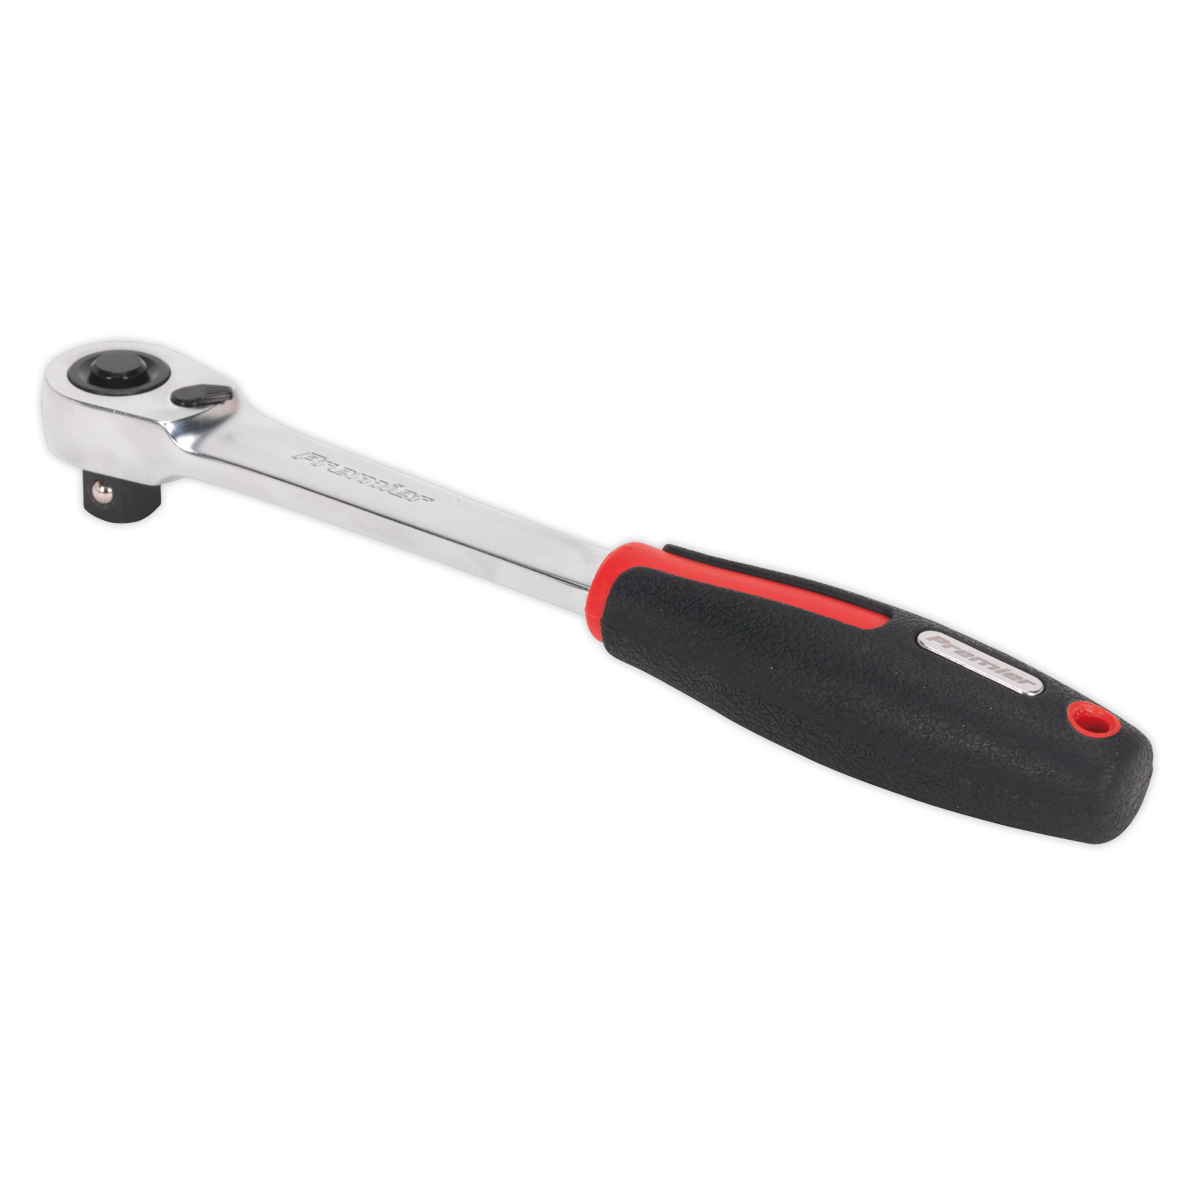 Ratchet Wrench 1/2"Sq Drive Compact Head 72-Tooth Flip Reverse Platinum Series - AK8982 - Farming Parts